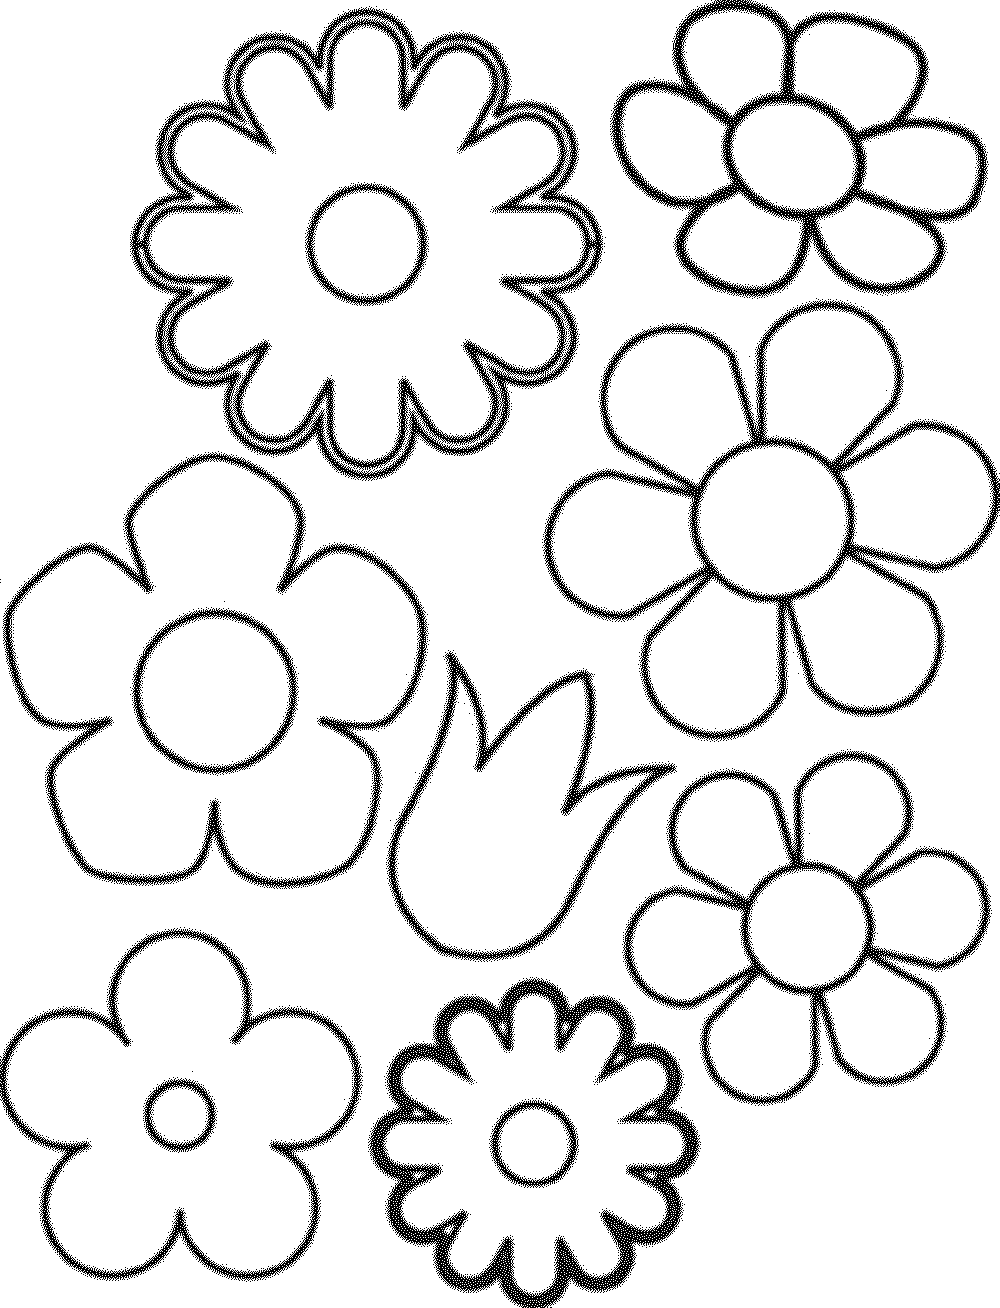 Print & Download - Some Common Variations of the Flower Coloring Pages |  Printable flower coloring pages, Flower coloring pages, Shape coloring pages